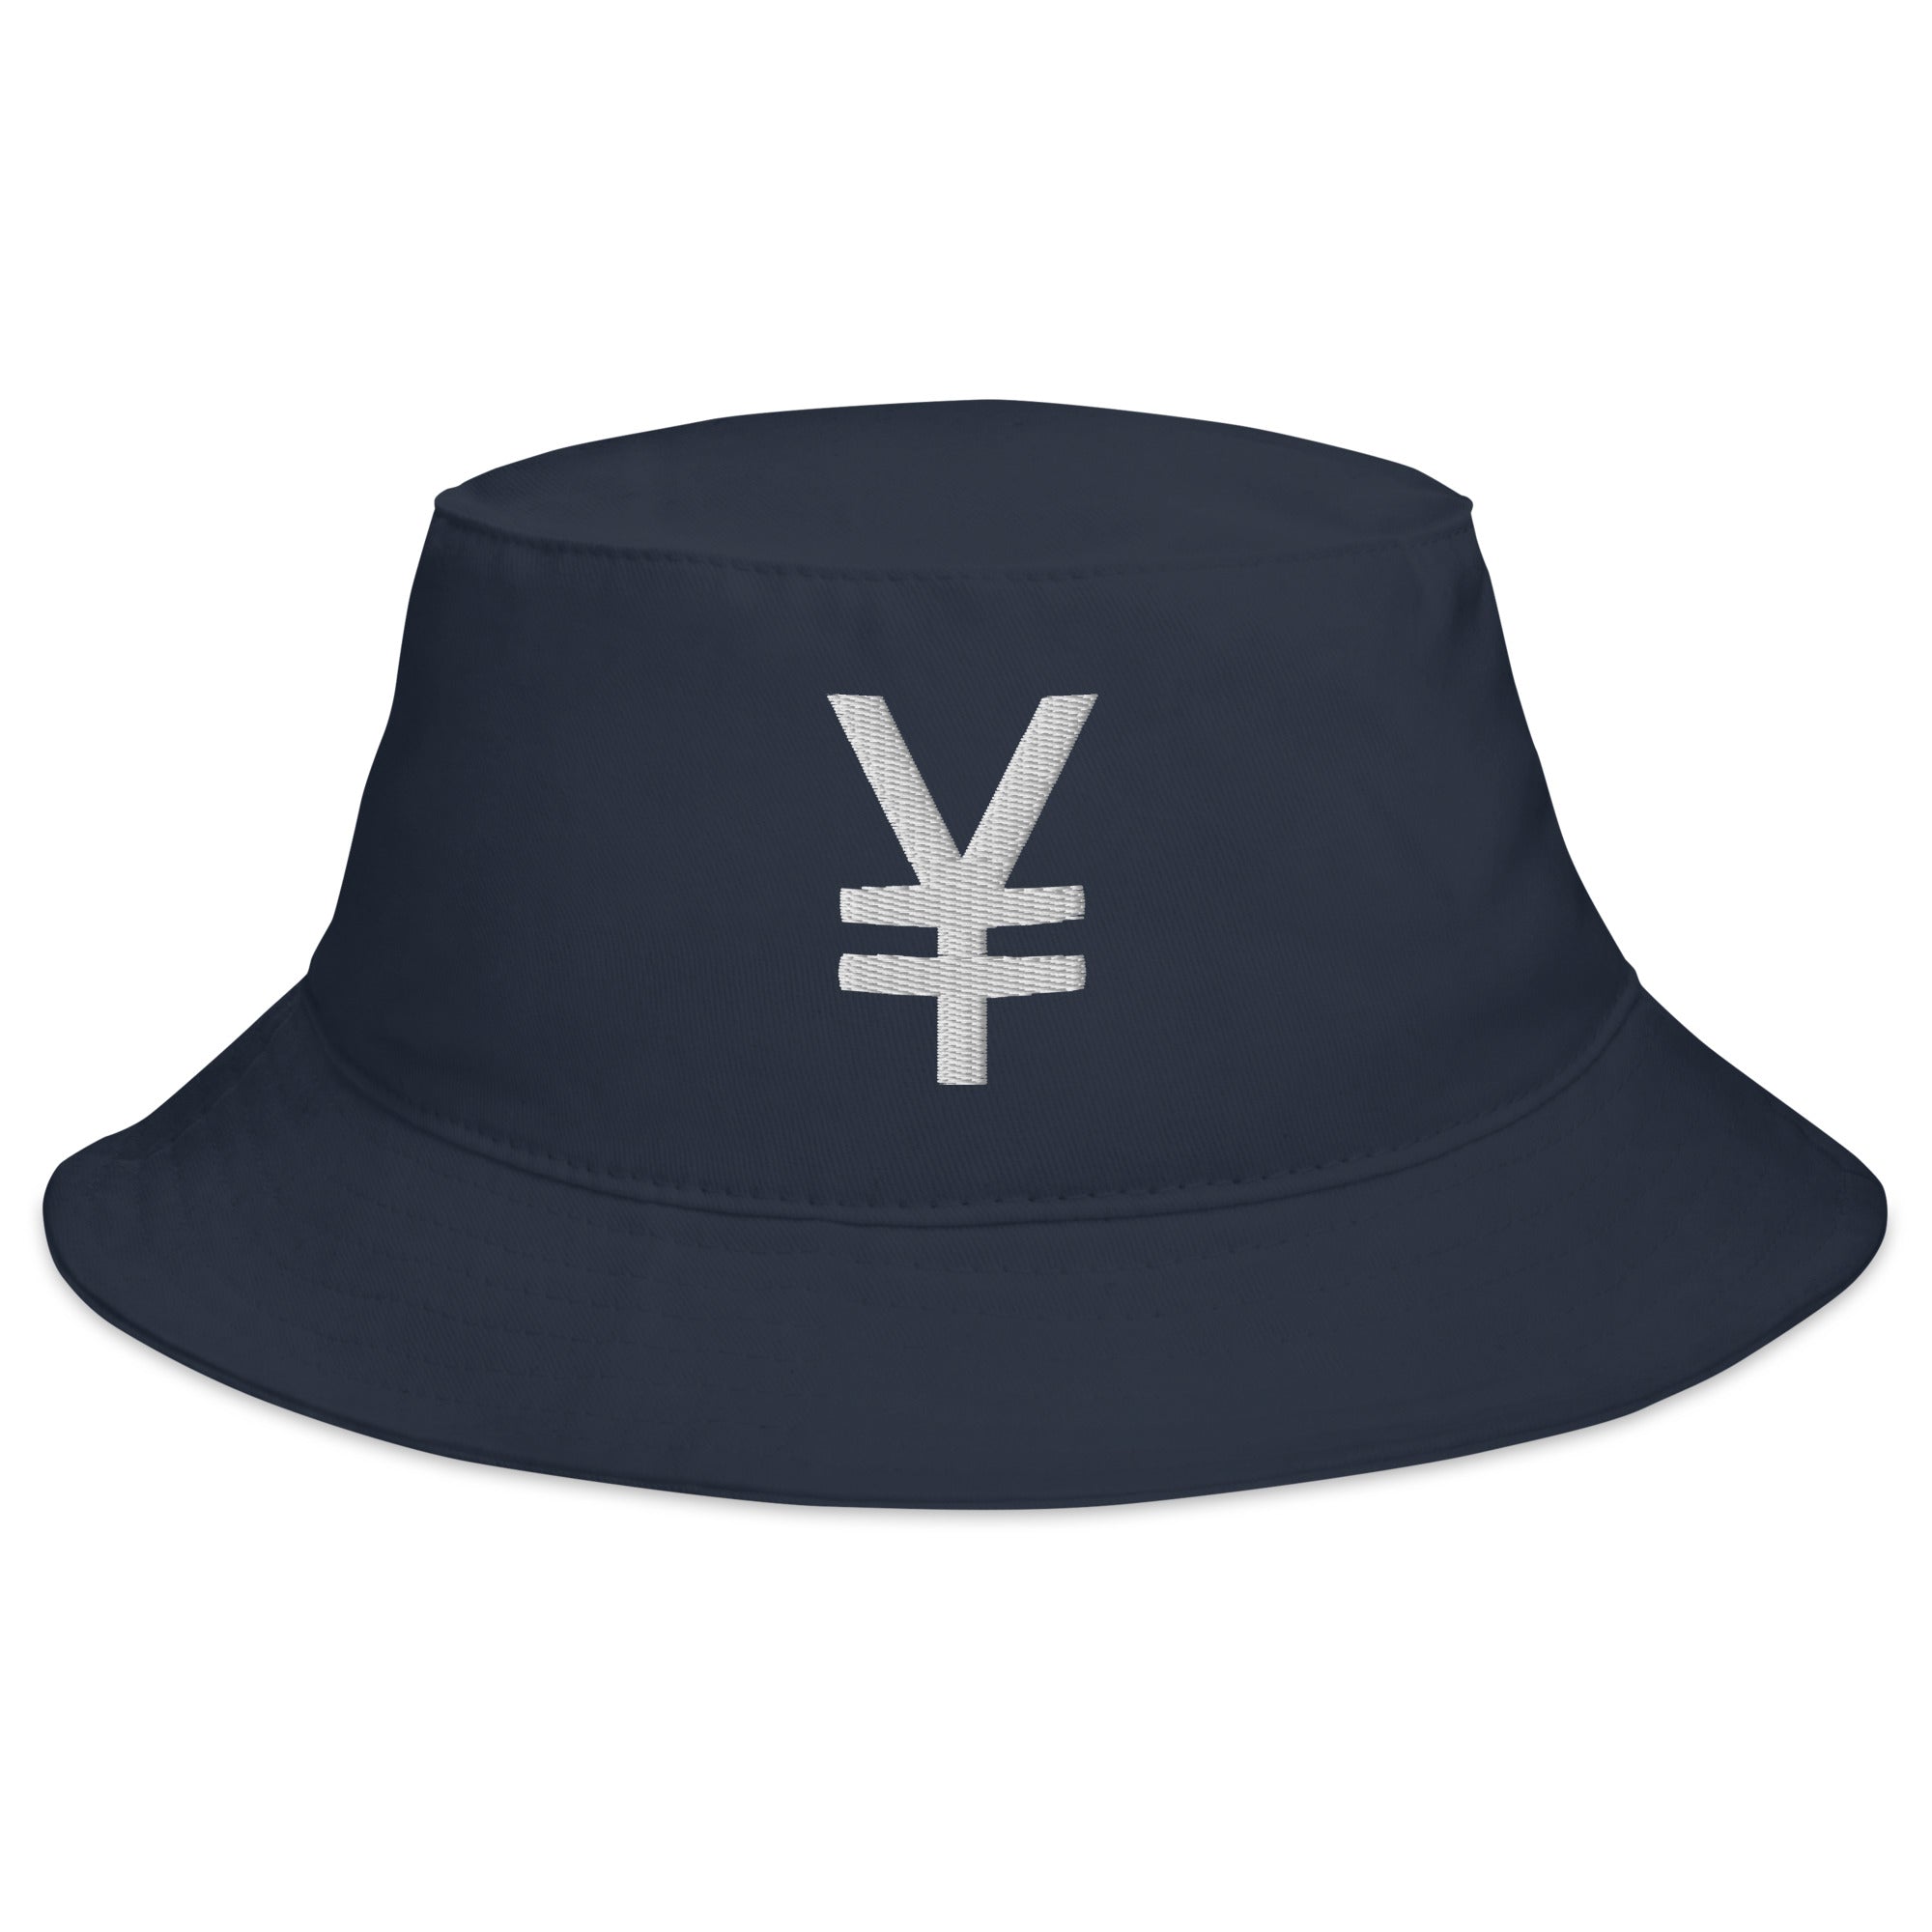 The Yen and Yuan Sign of Money Currency Embroidered Bucket Hat